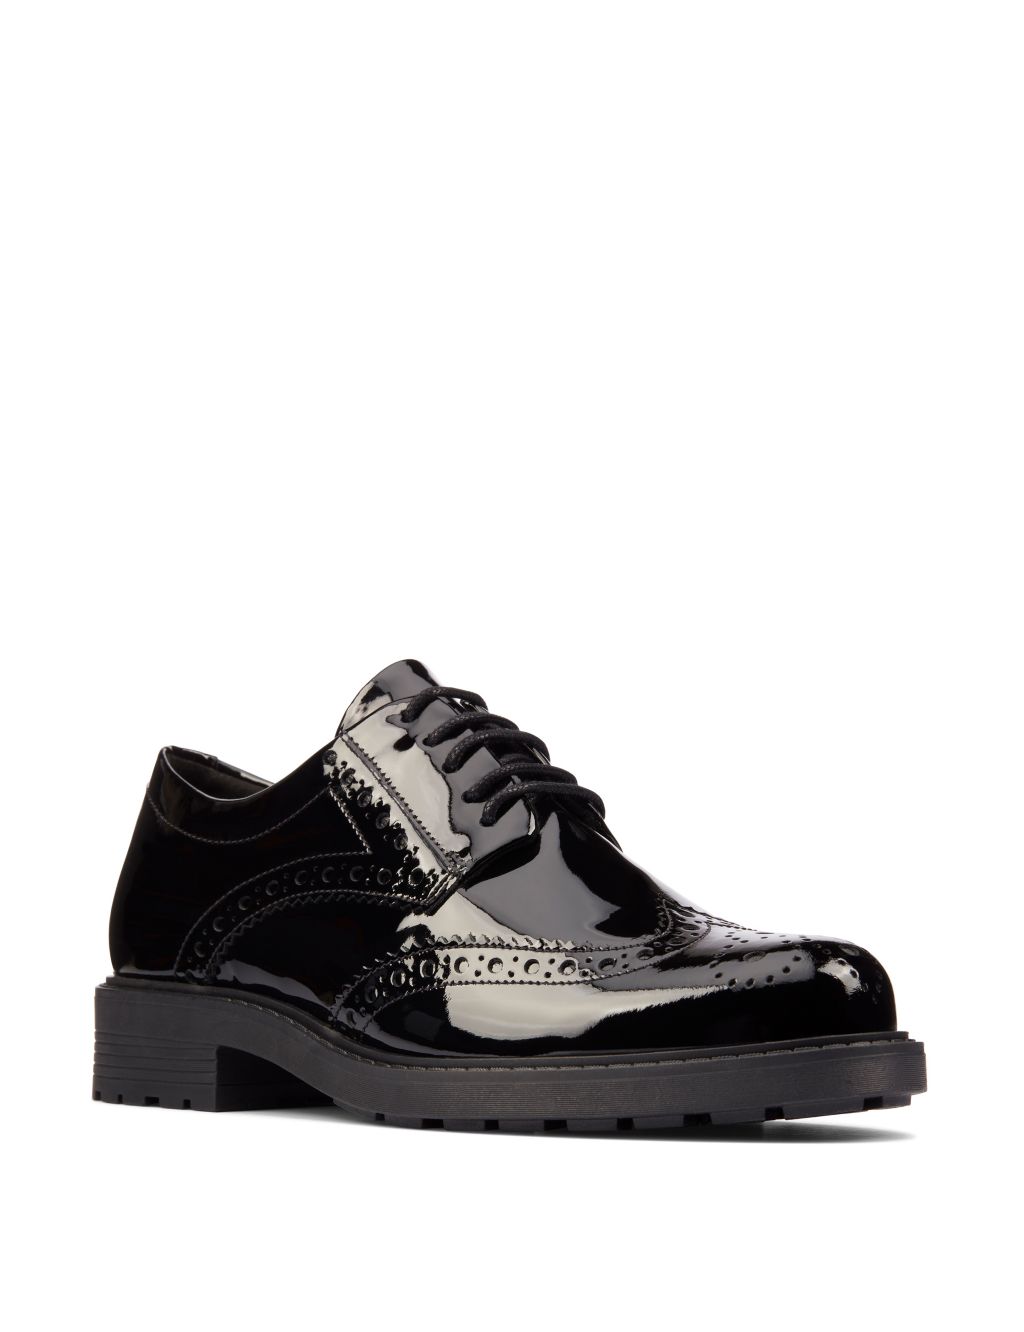 Buy Leather Patent Lace Up Brogues | CLARKS | M&S